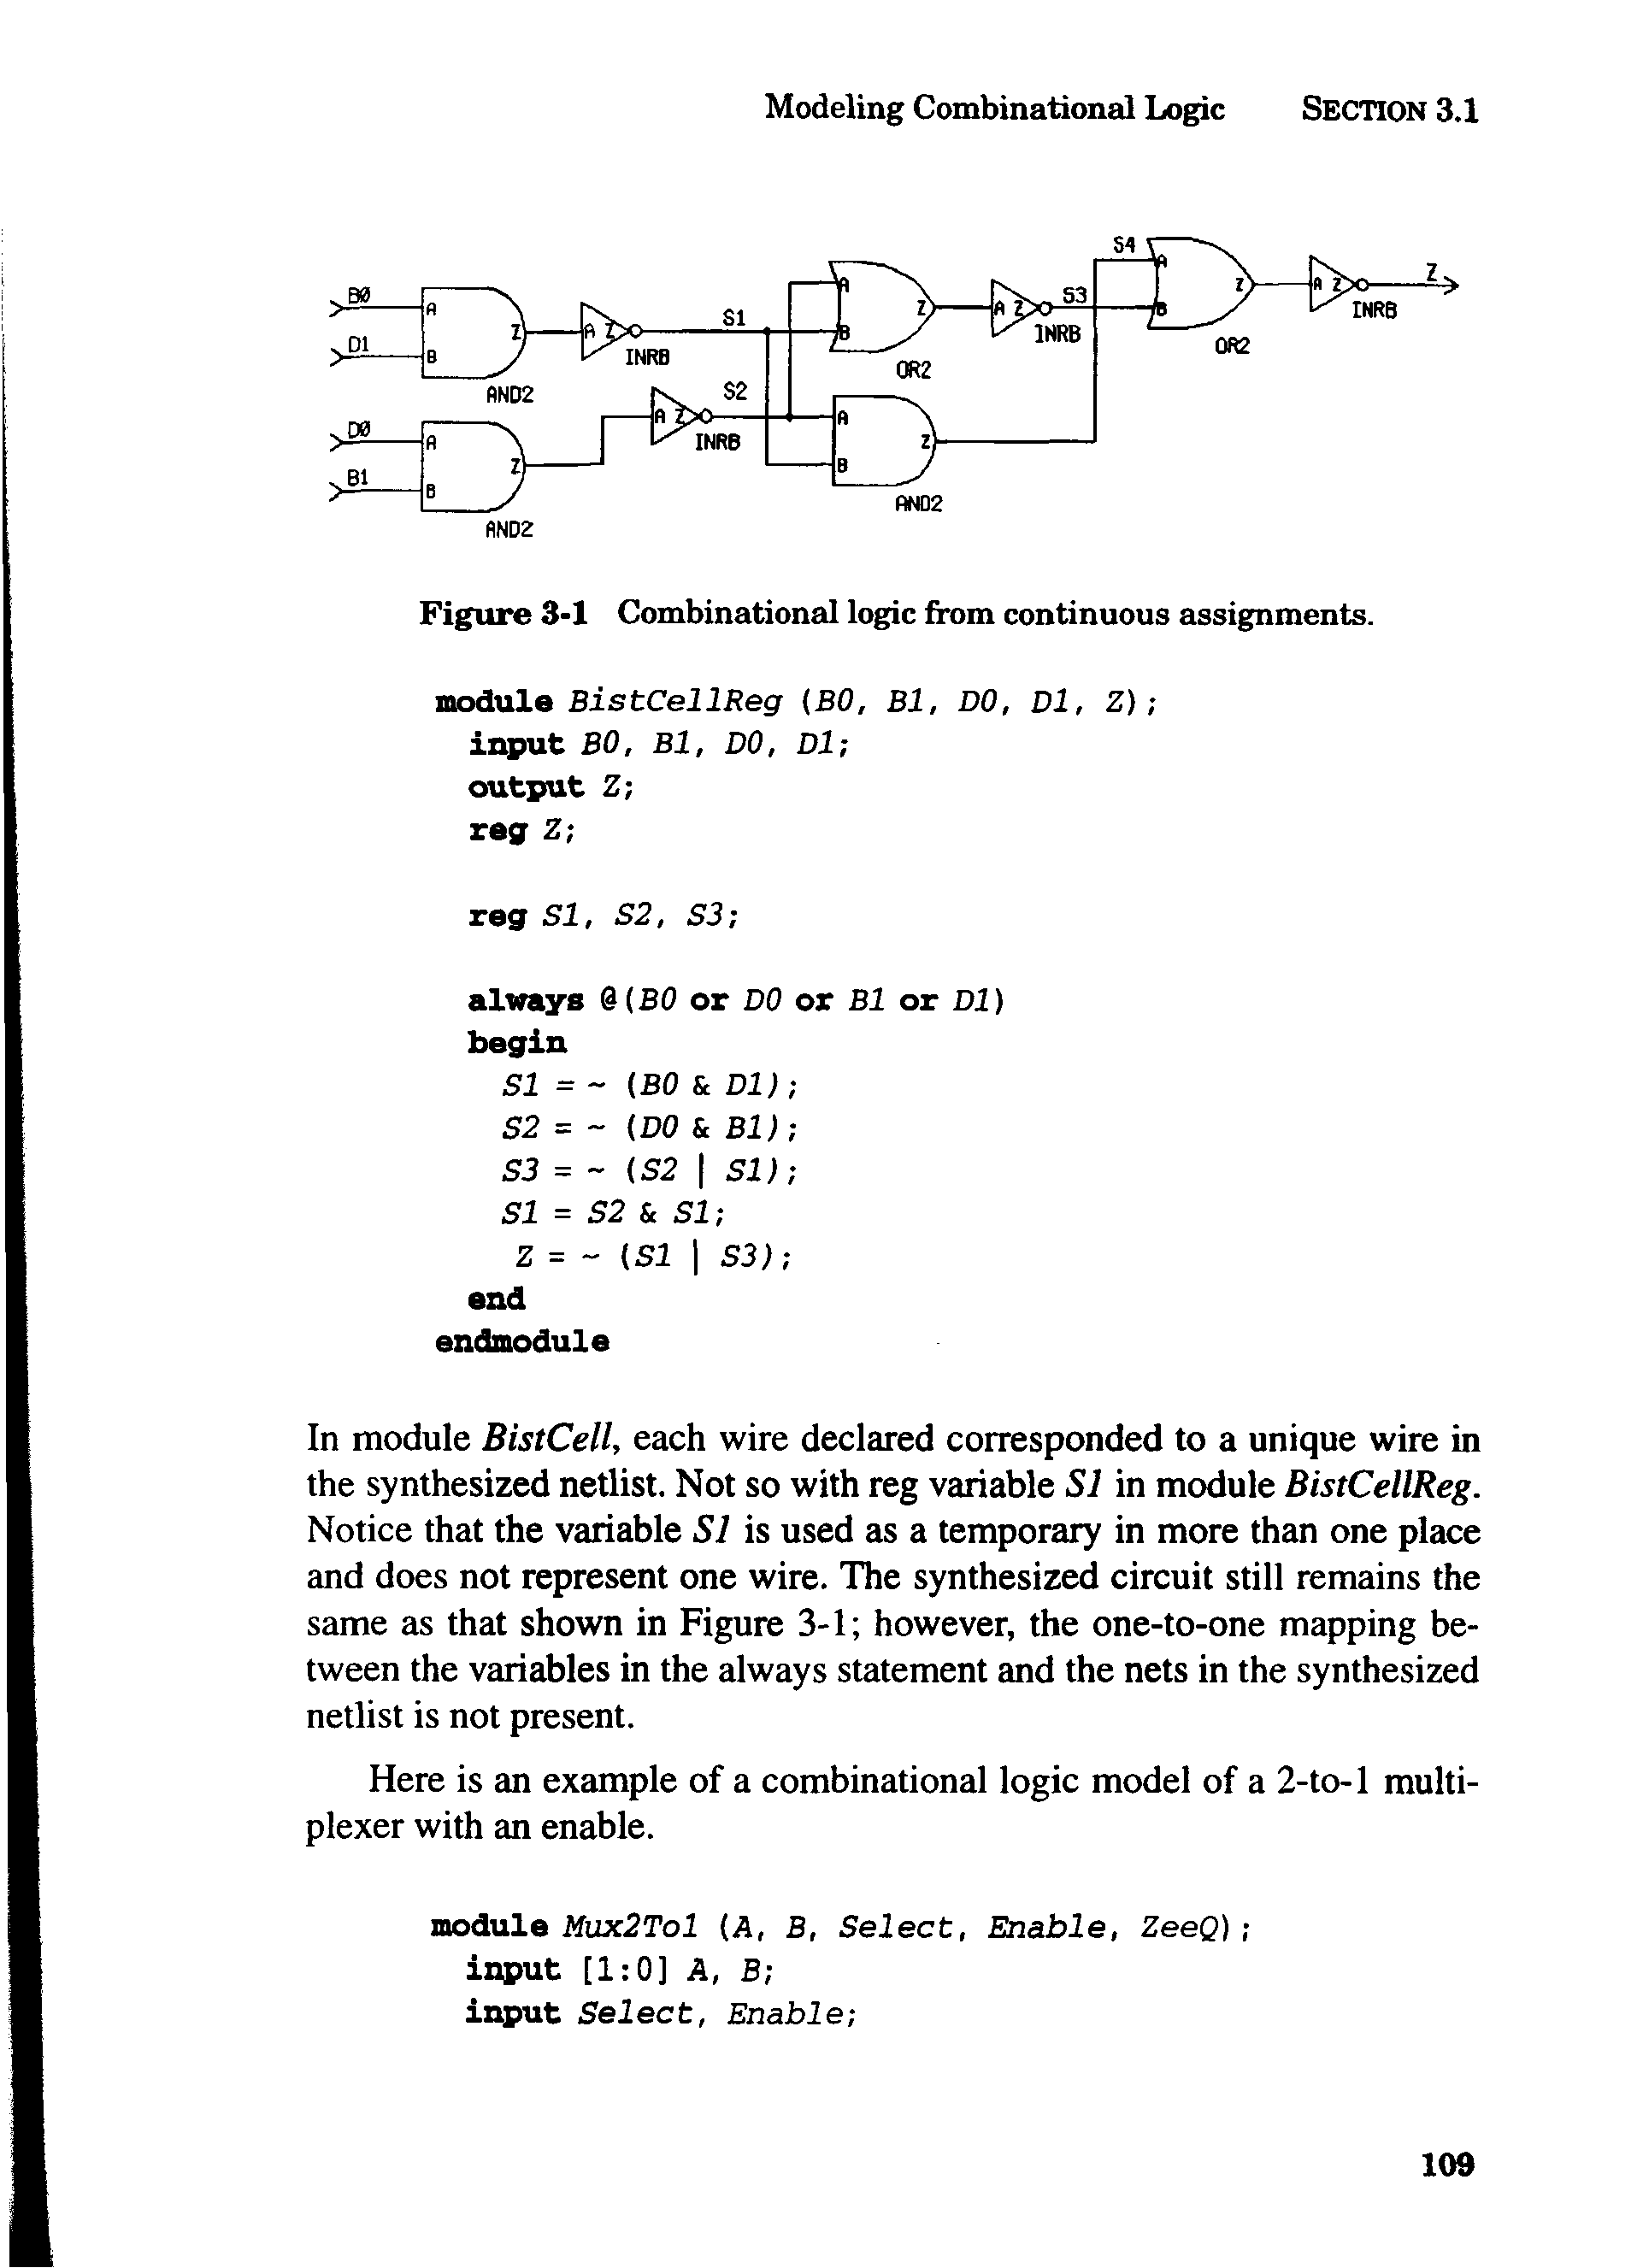 Figure 3-1 Combinational logic from continuous assignments.